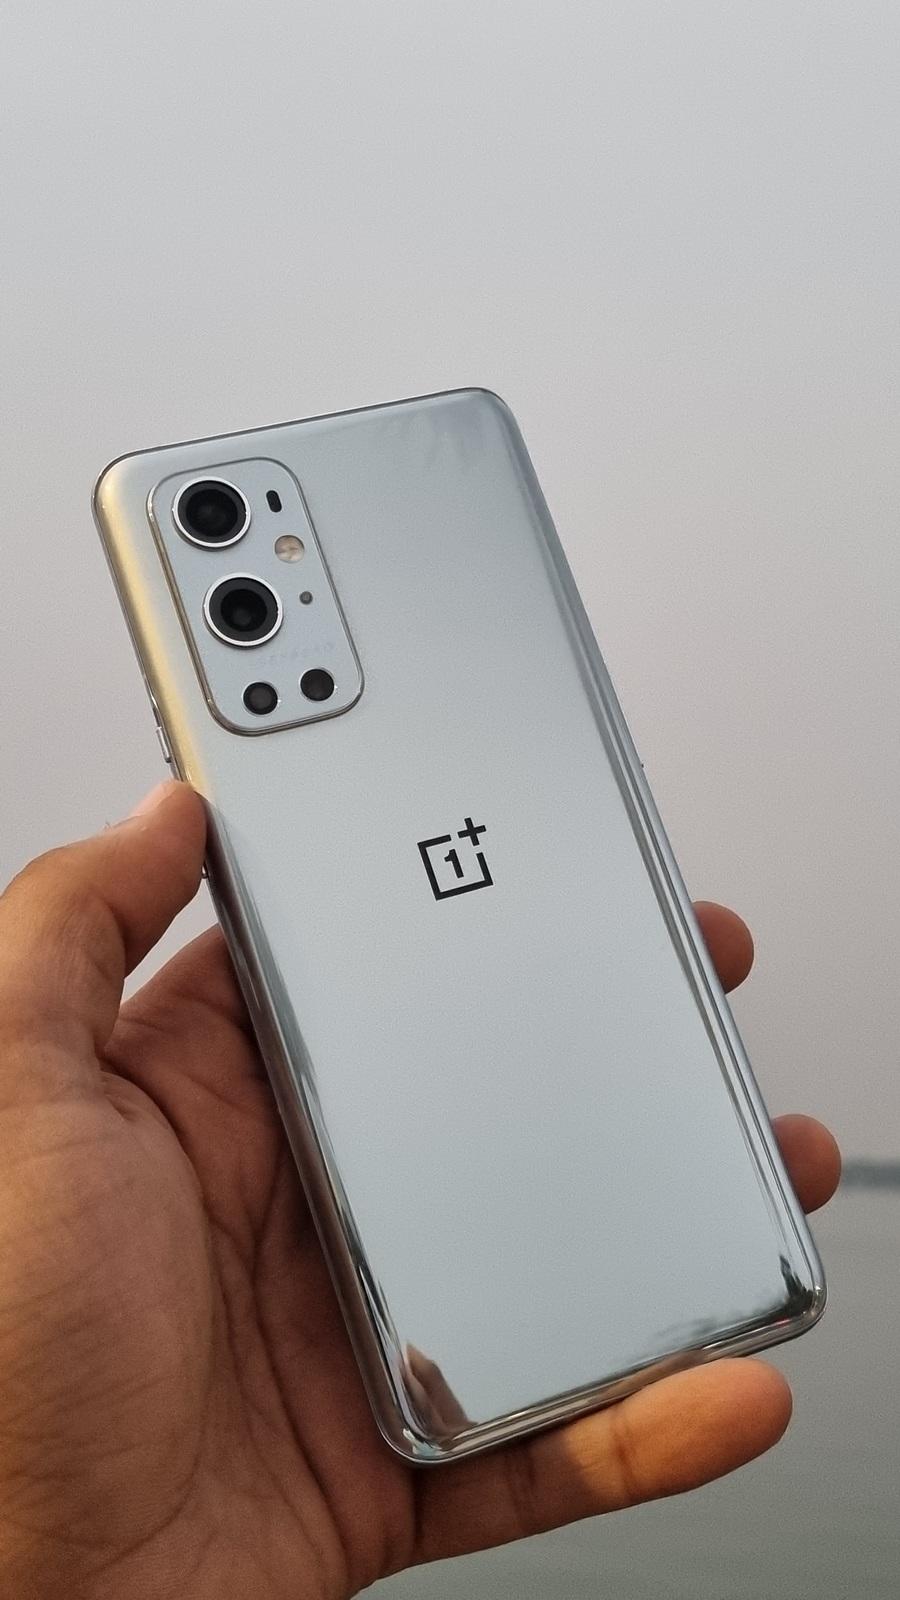 Oneplus 9 Pro And Oneplus 9 Hands On Overview Business Insider India